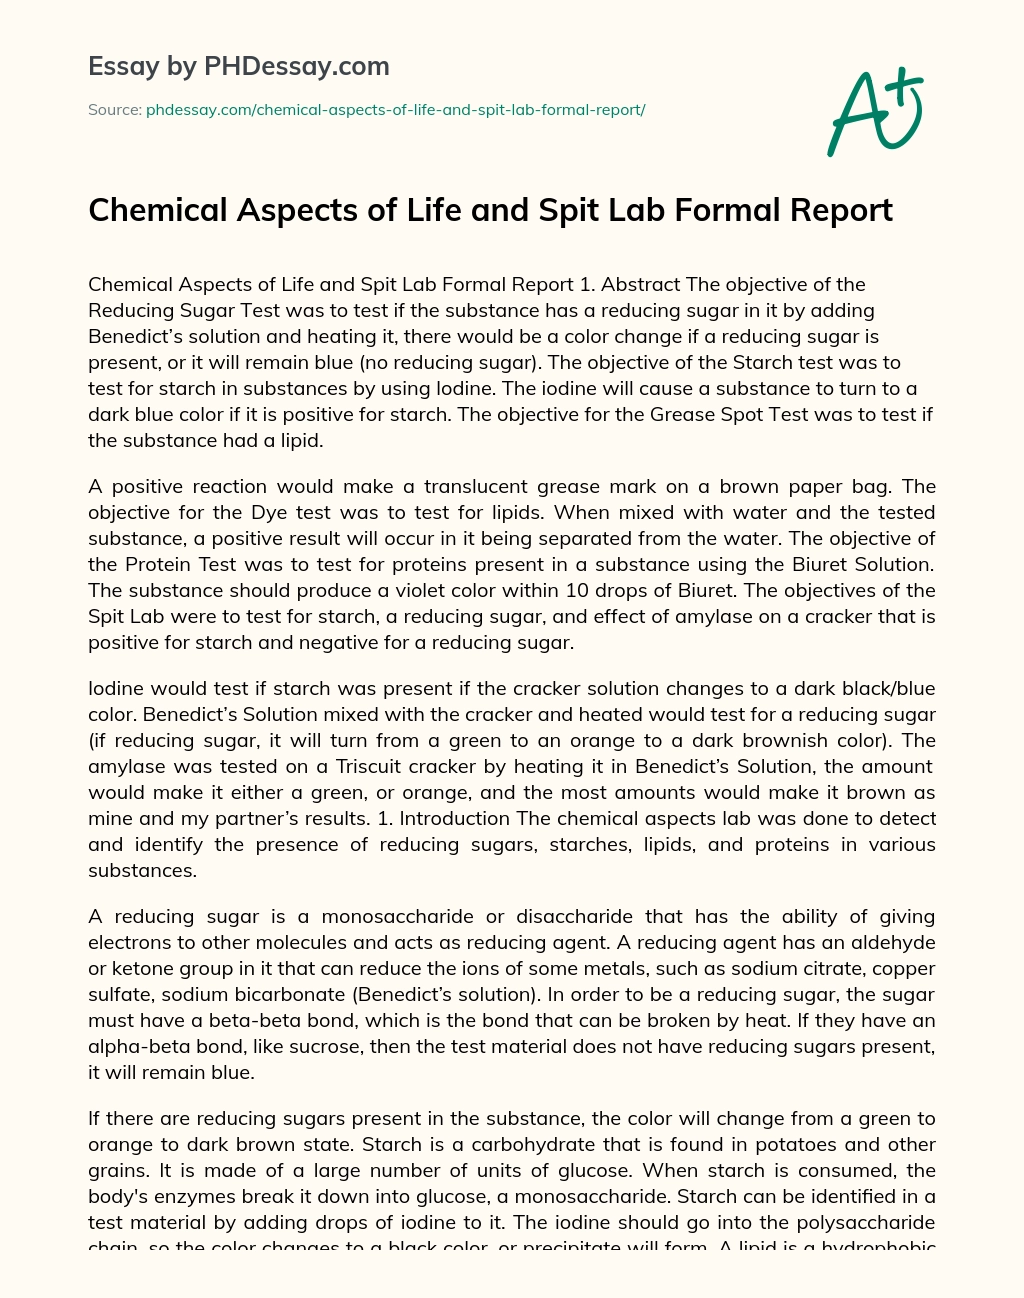 Chemical Aspects of Life and Spit Lab Formal Report essay